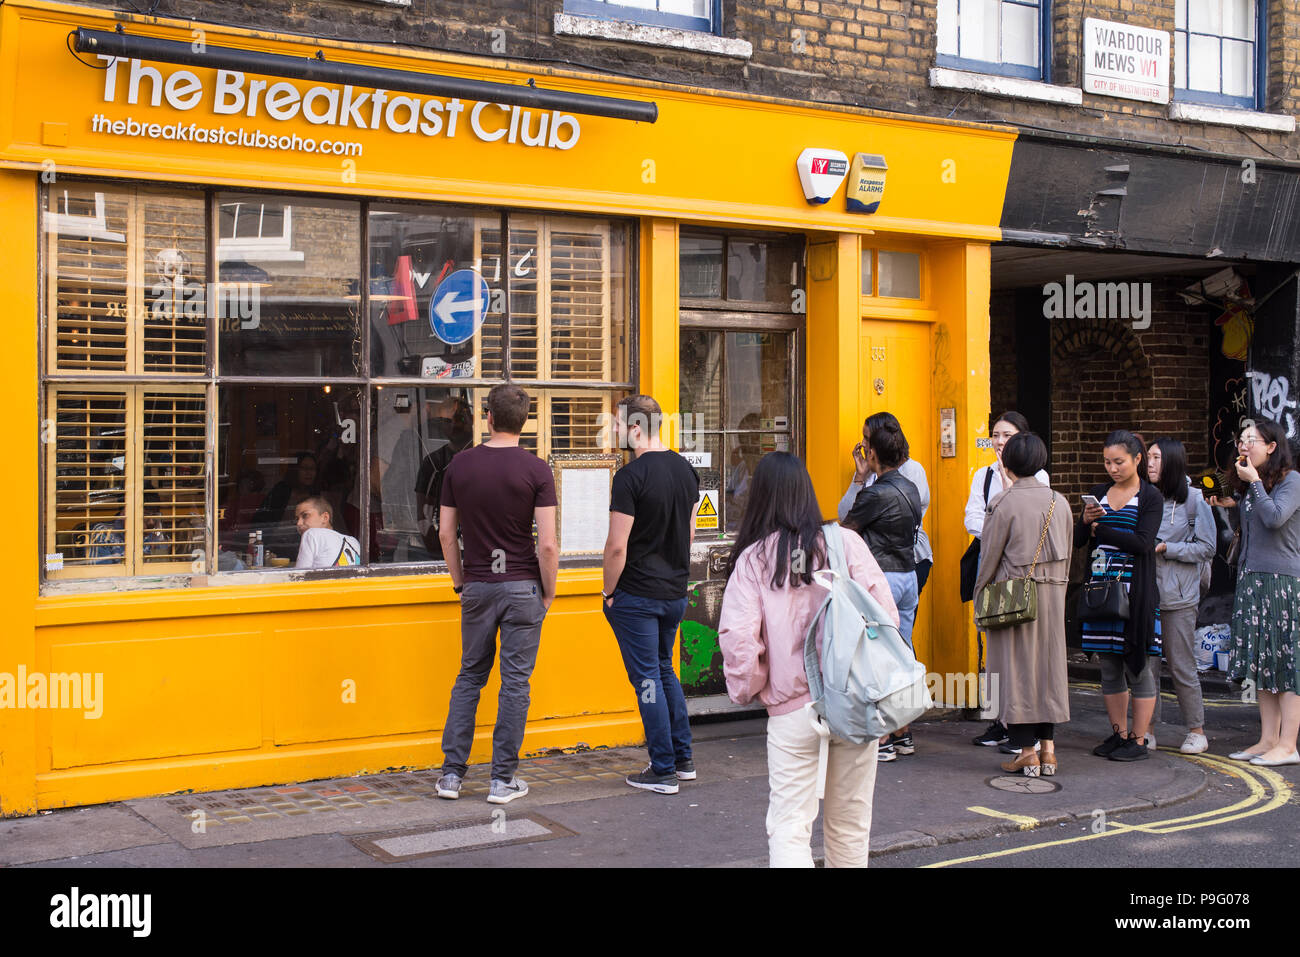 The Breakfast Club Soho, with people queuing for breakfast or brunch. This is the first original Breakfast Club opened in Soho, London in 2005. Stock Photo